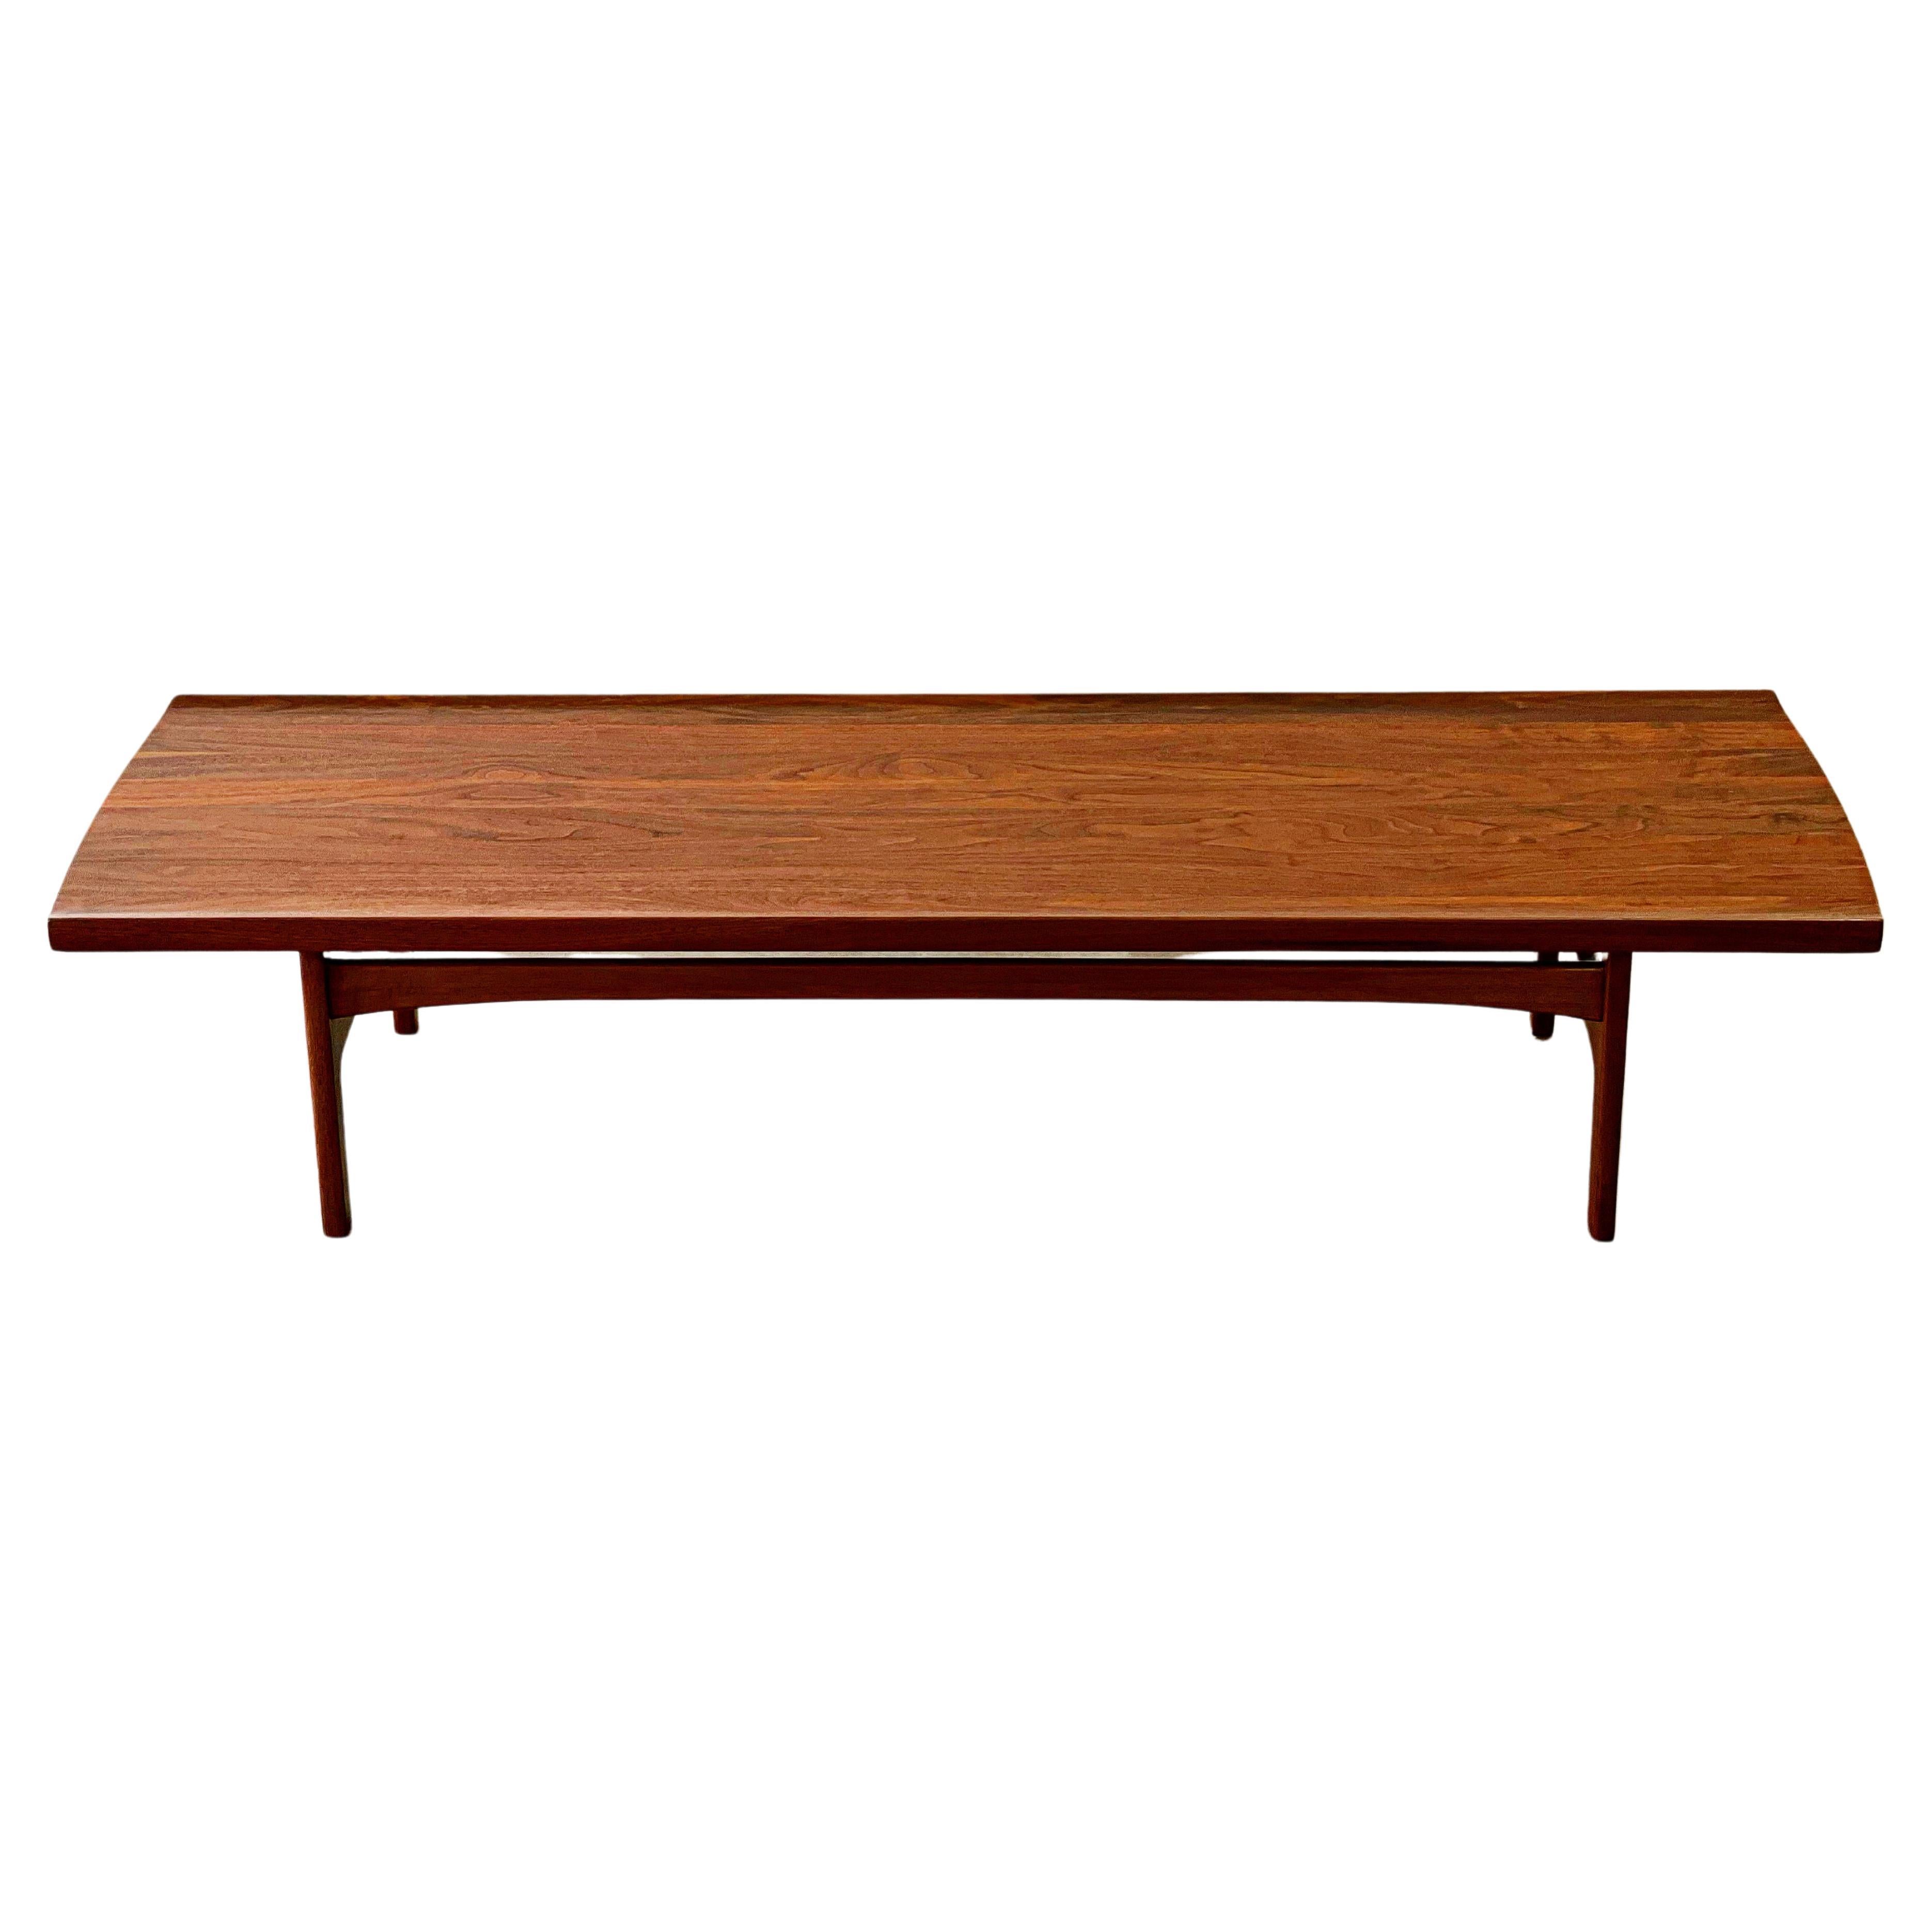 Rare solid walnut long coffee table by Tove and Edvard Kindt-Larsen for Dux, Swden circa 1960s. Staved solid walnut with contrasting beech wood inlayed joinery on either end. Stellar design, materials and craftsmanship.
Fully restored by our team